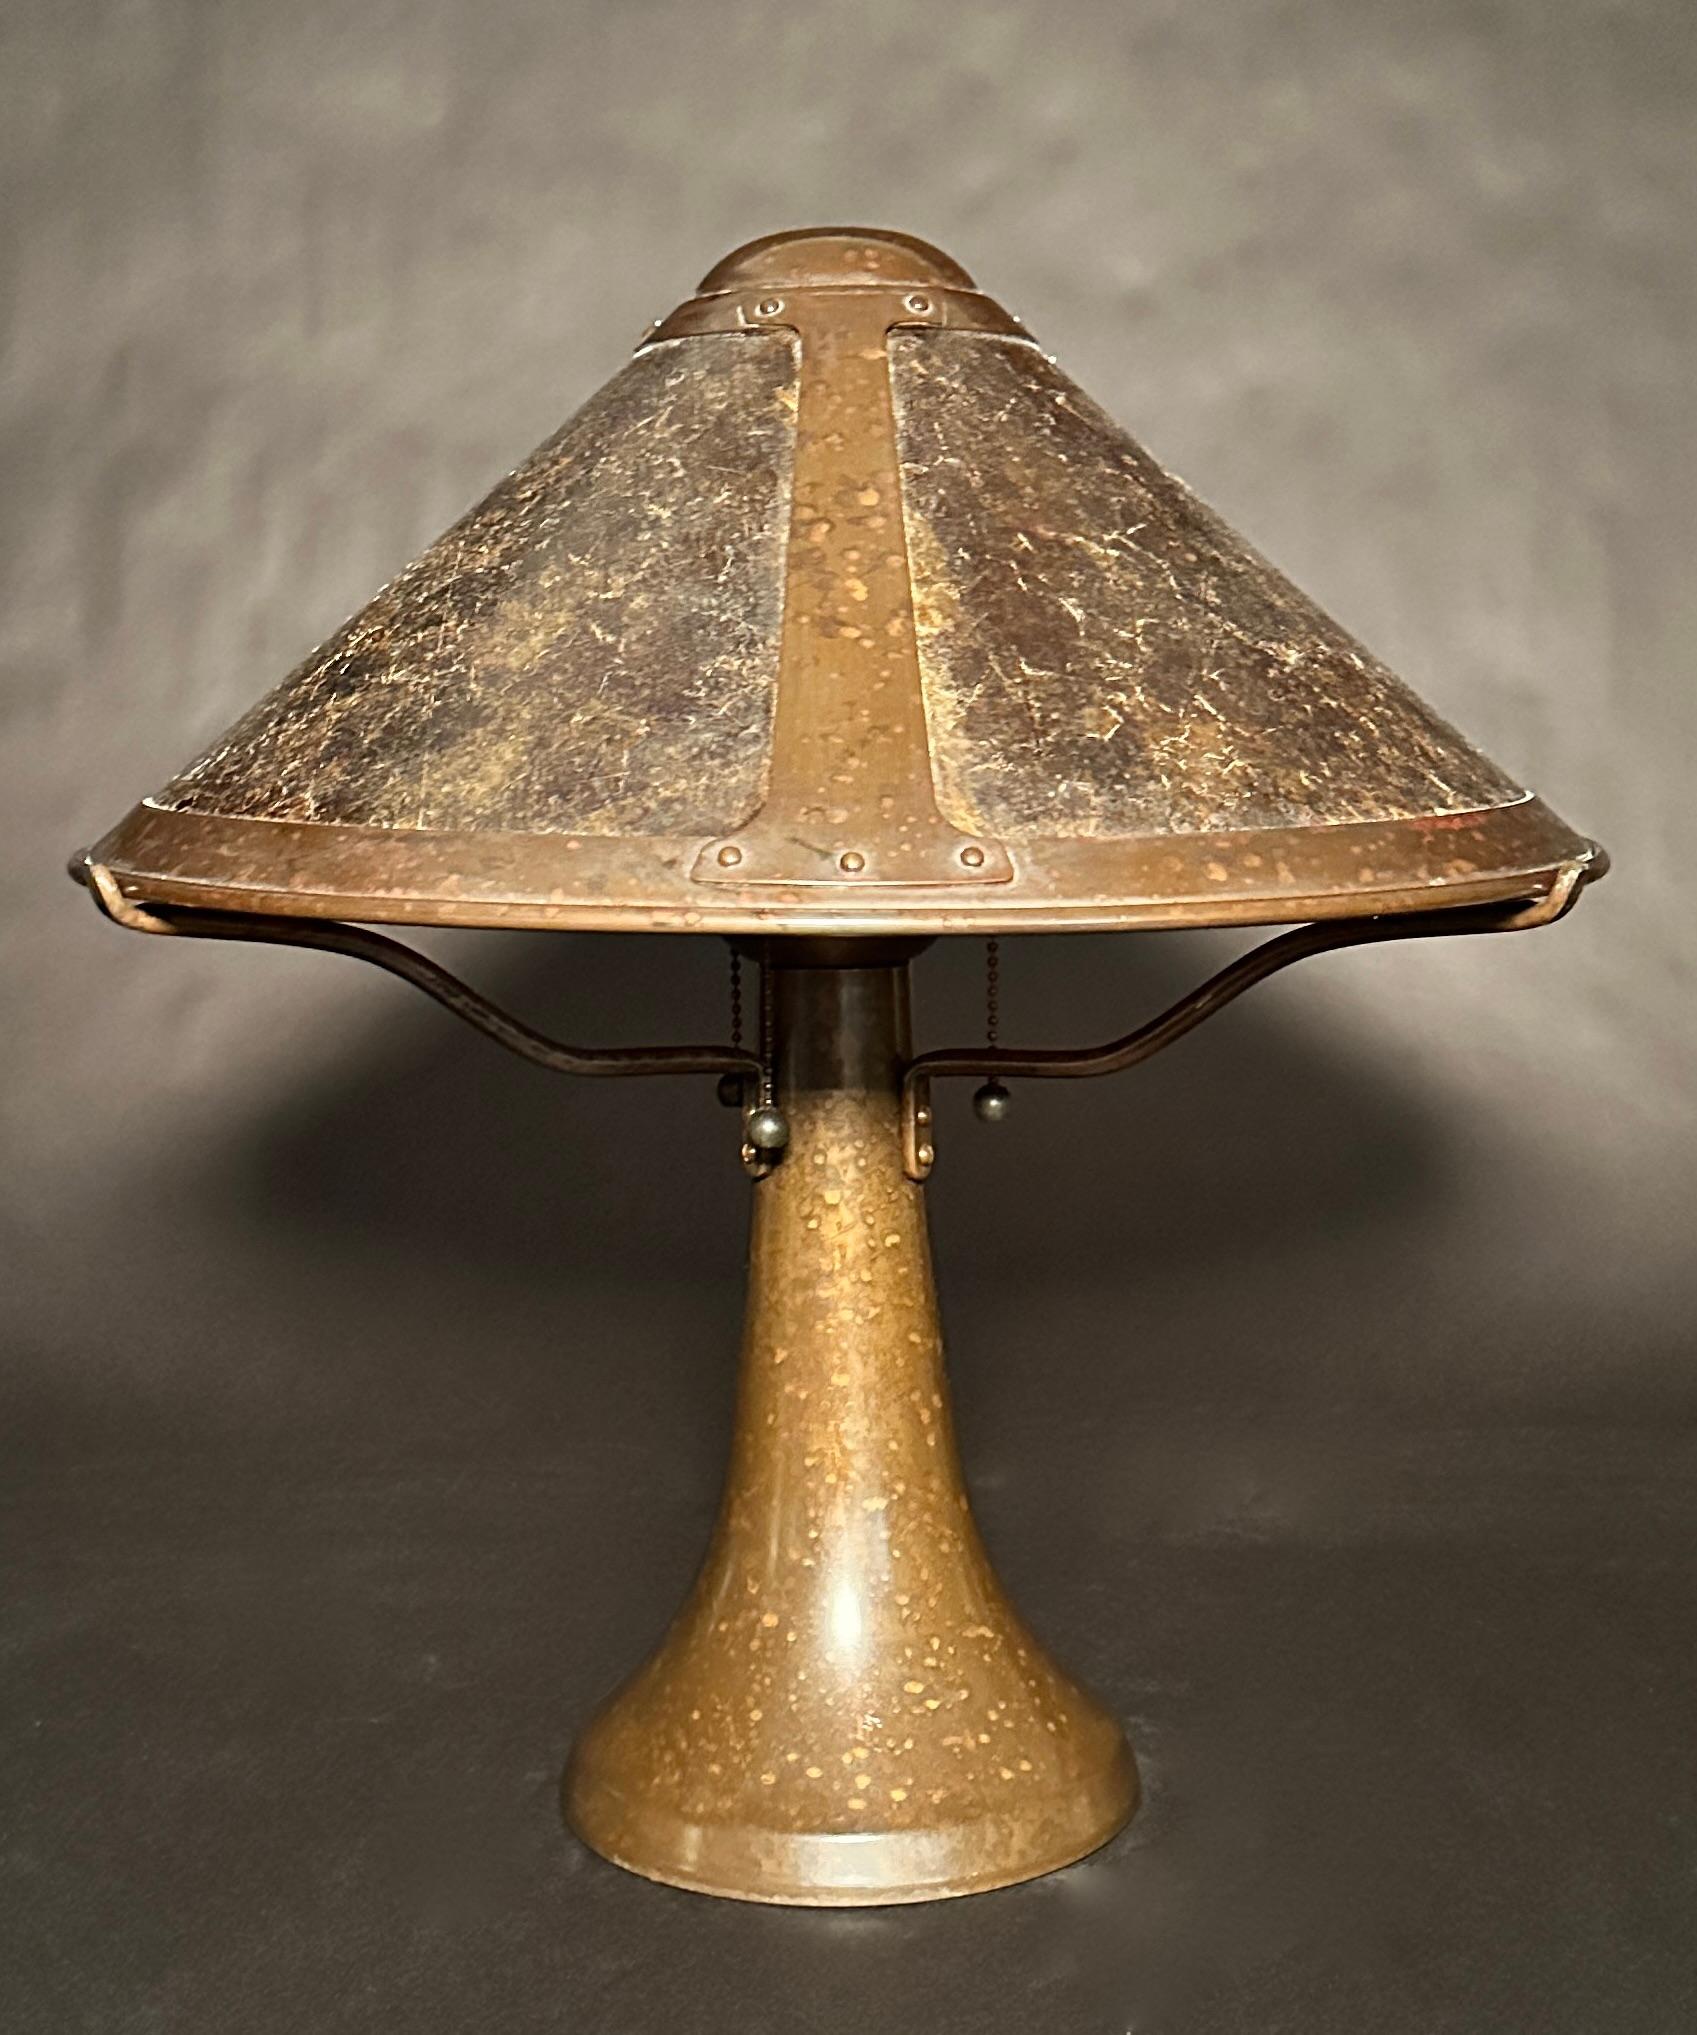 Copper and mica arts and crafts style lamp and shade made by the Mica Lamp Co., Glendale, Ca. base and shade with makers mark. Shade with serial number. Round base and shade with three interior lights.